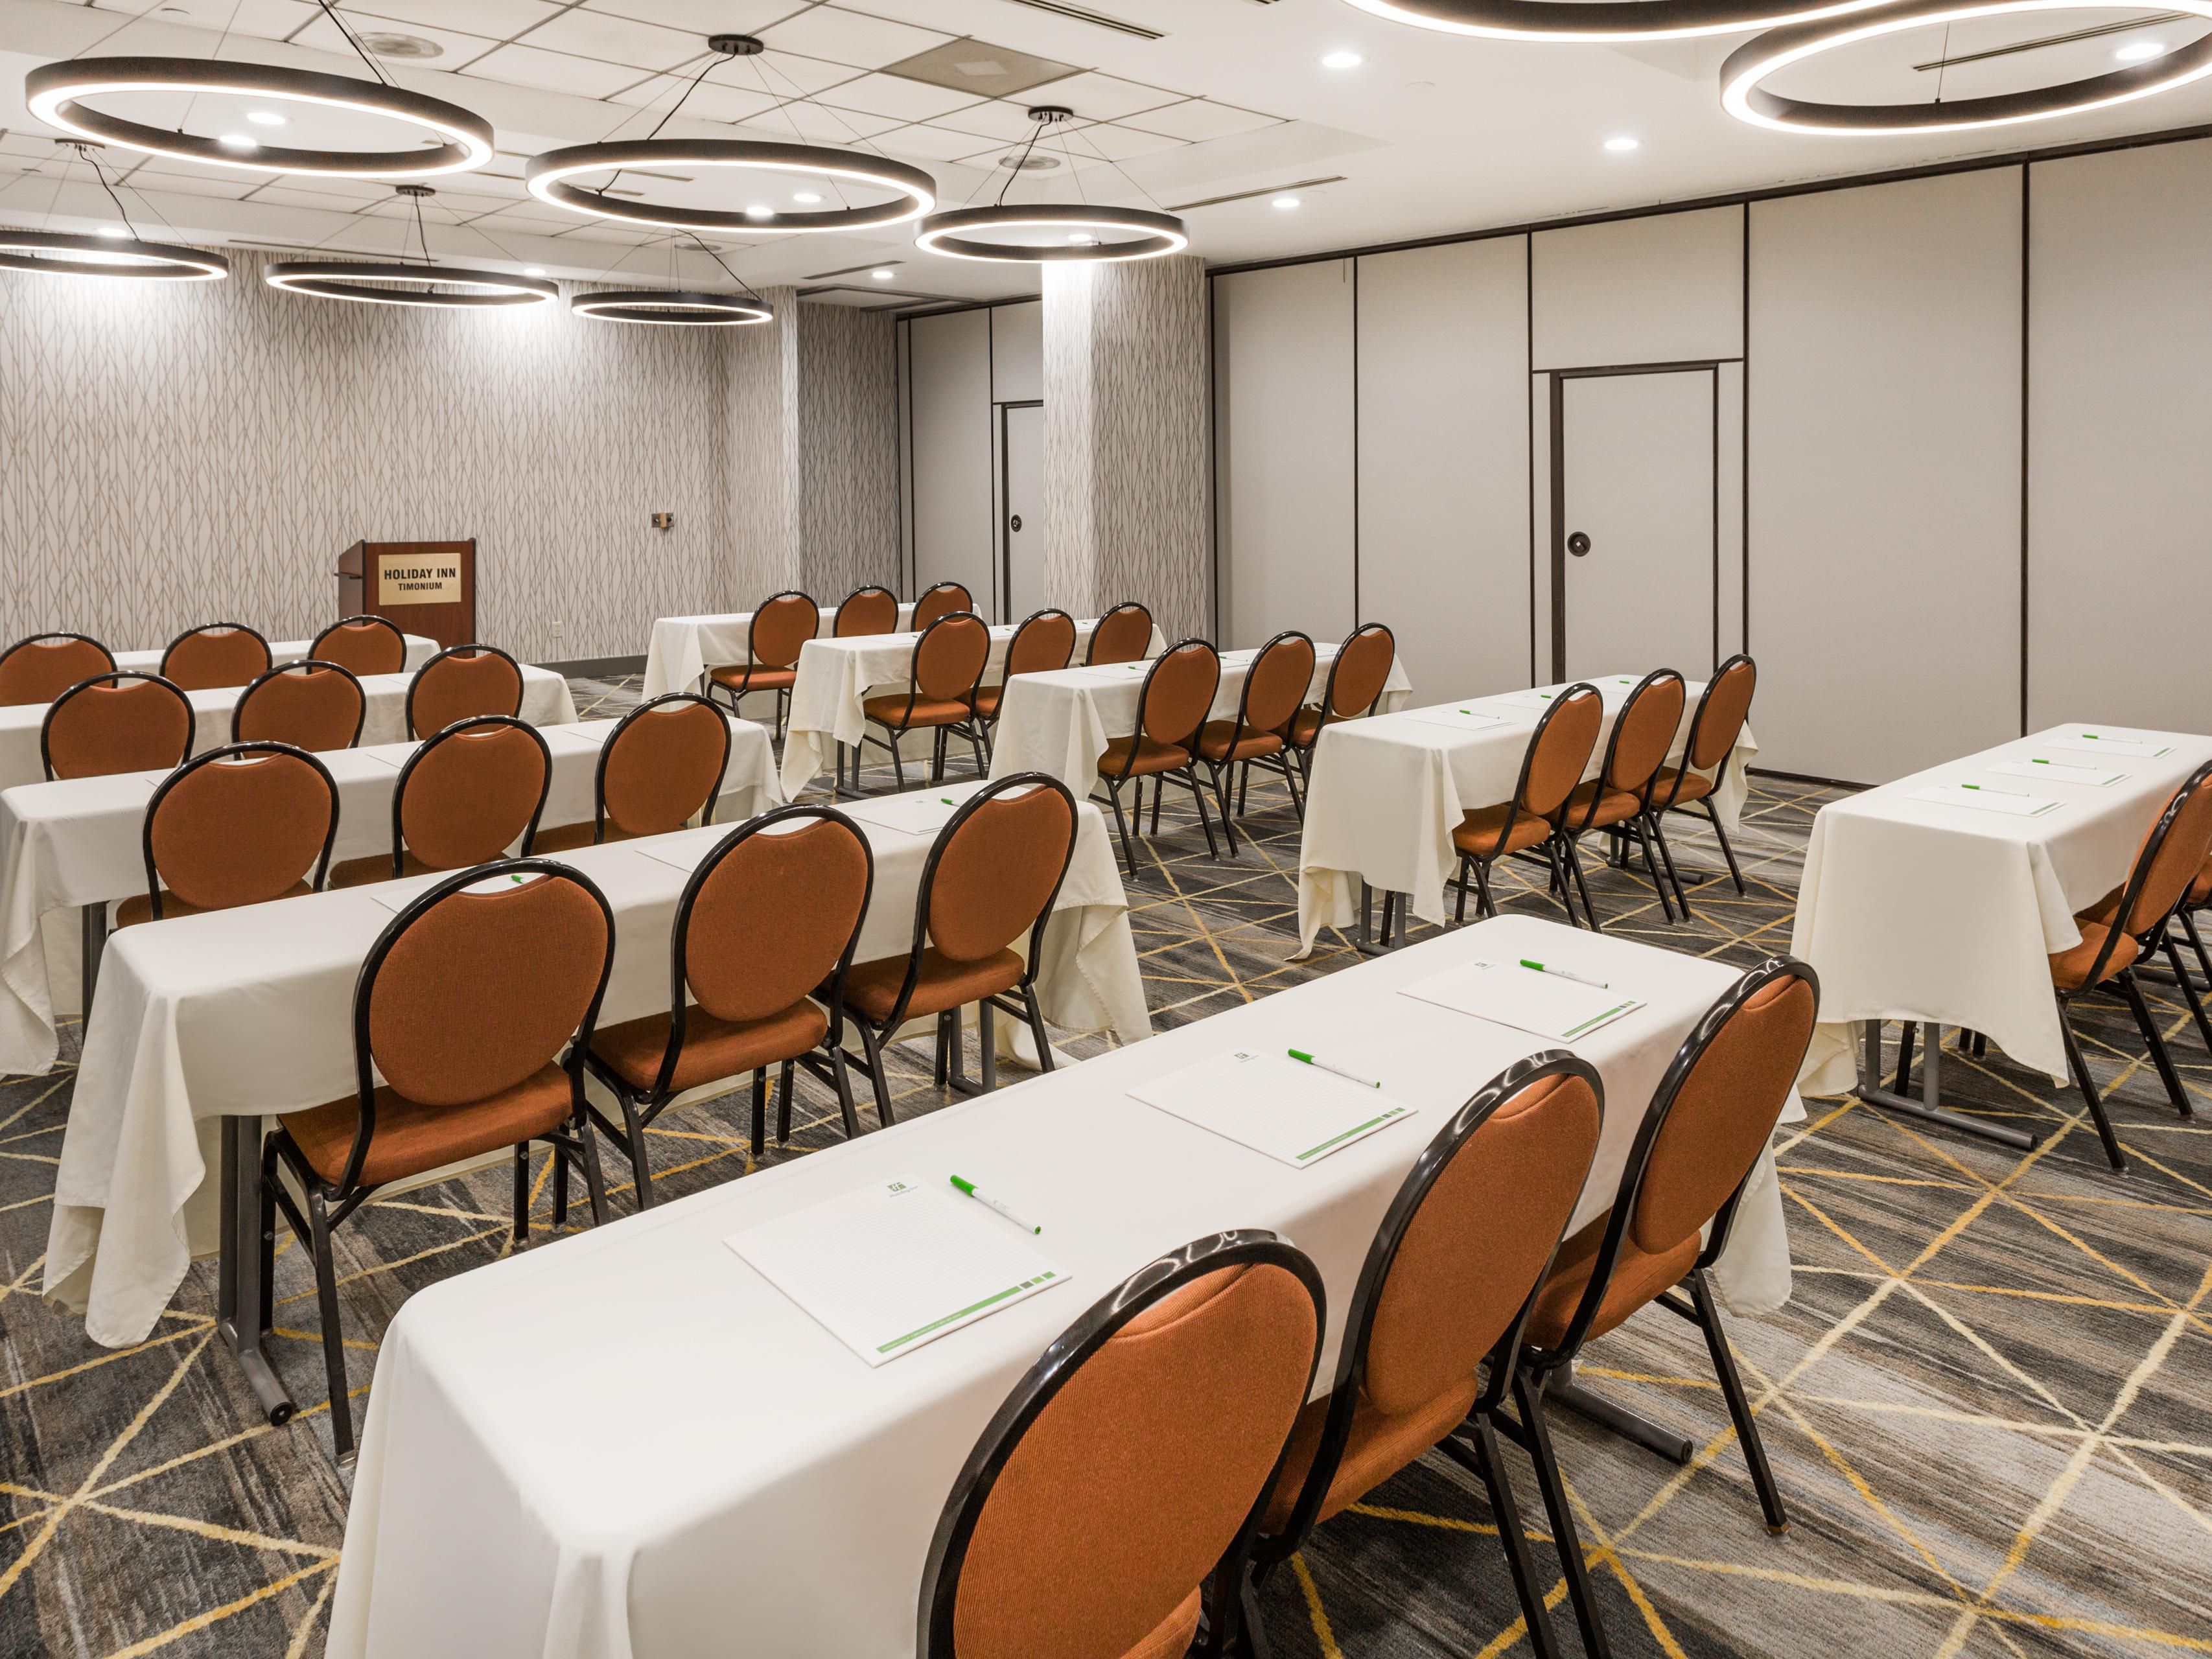 Hold your next corporate event with us in our renovated meeting space or brand new Boardroom! We have a variety of options to meet your catering and A/V needs.